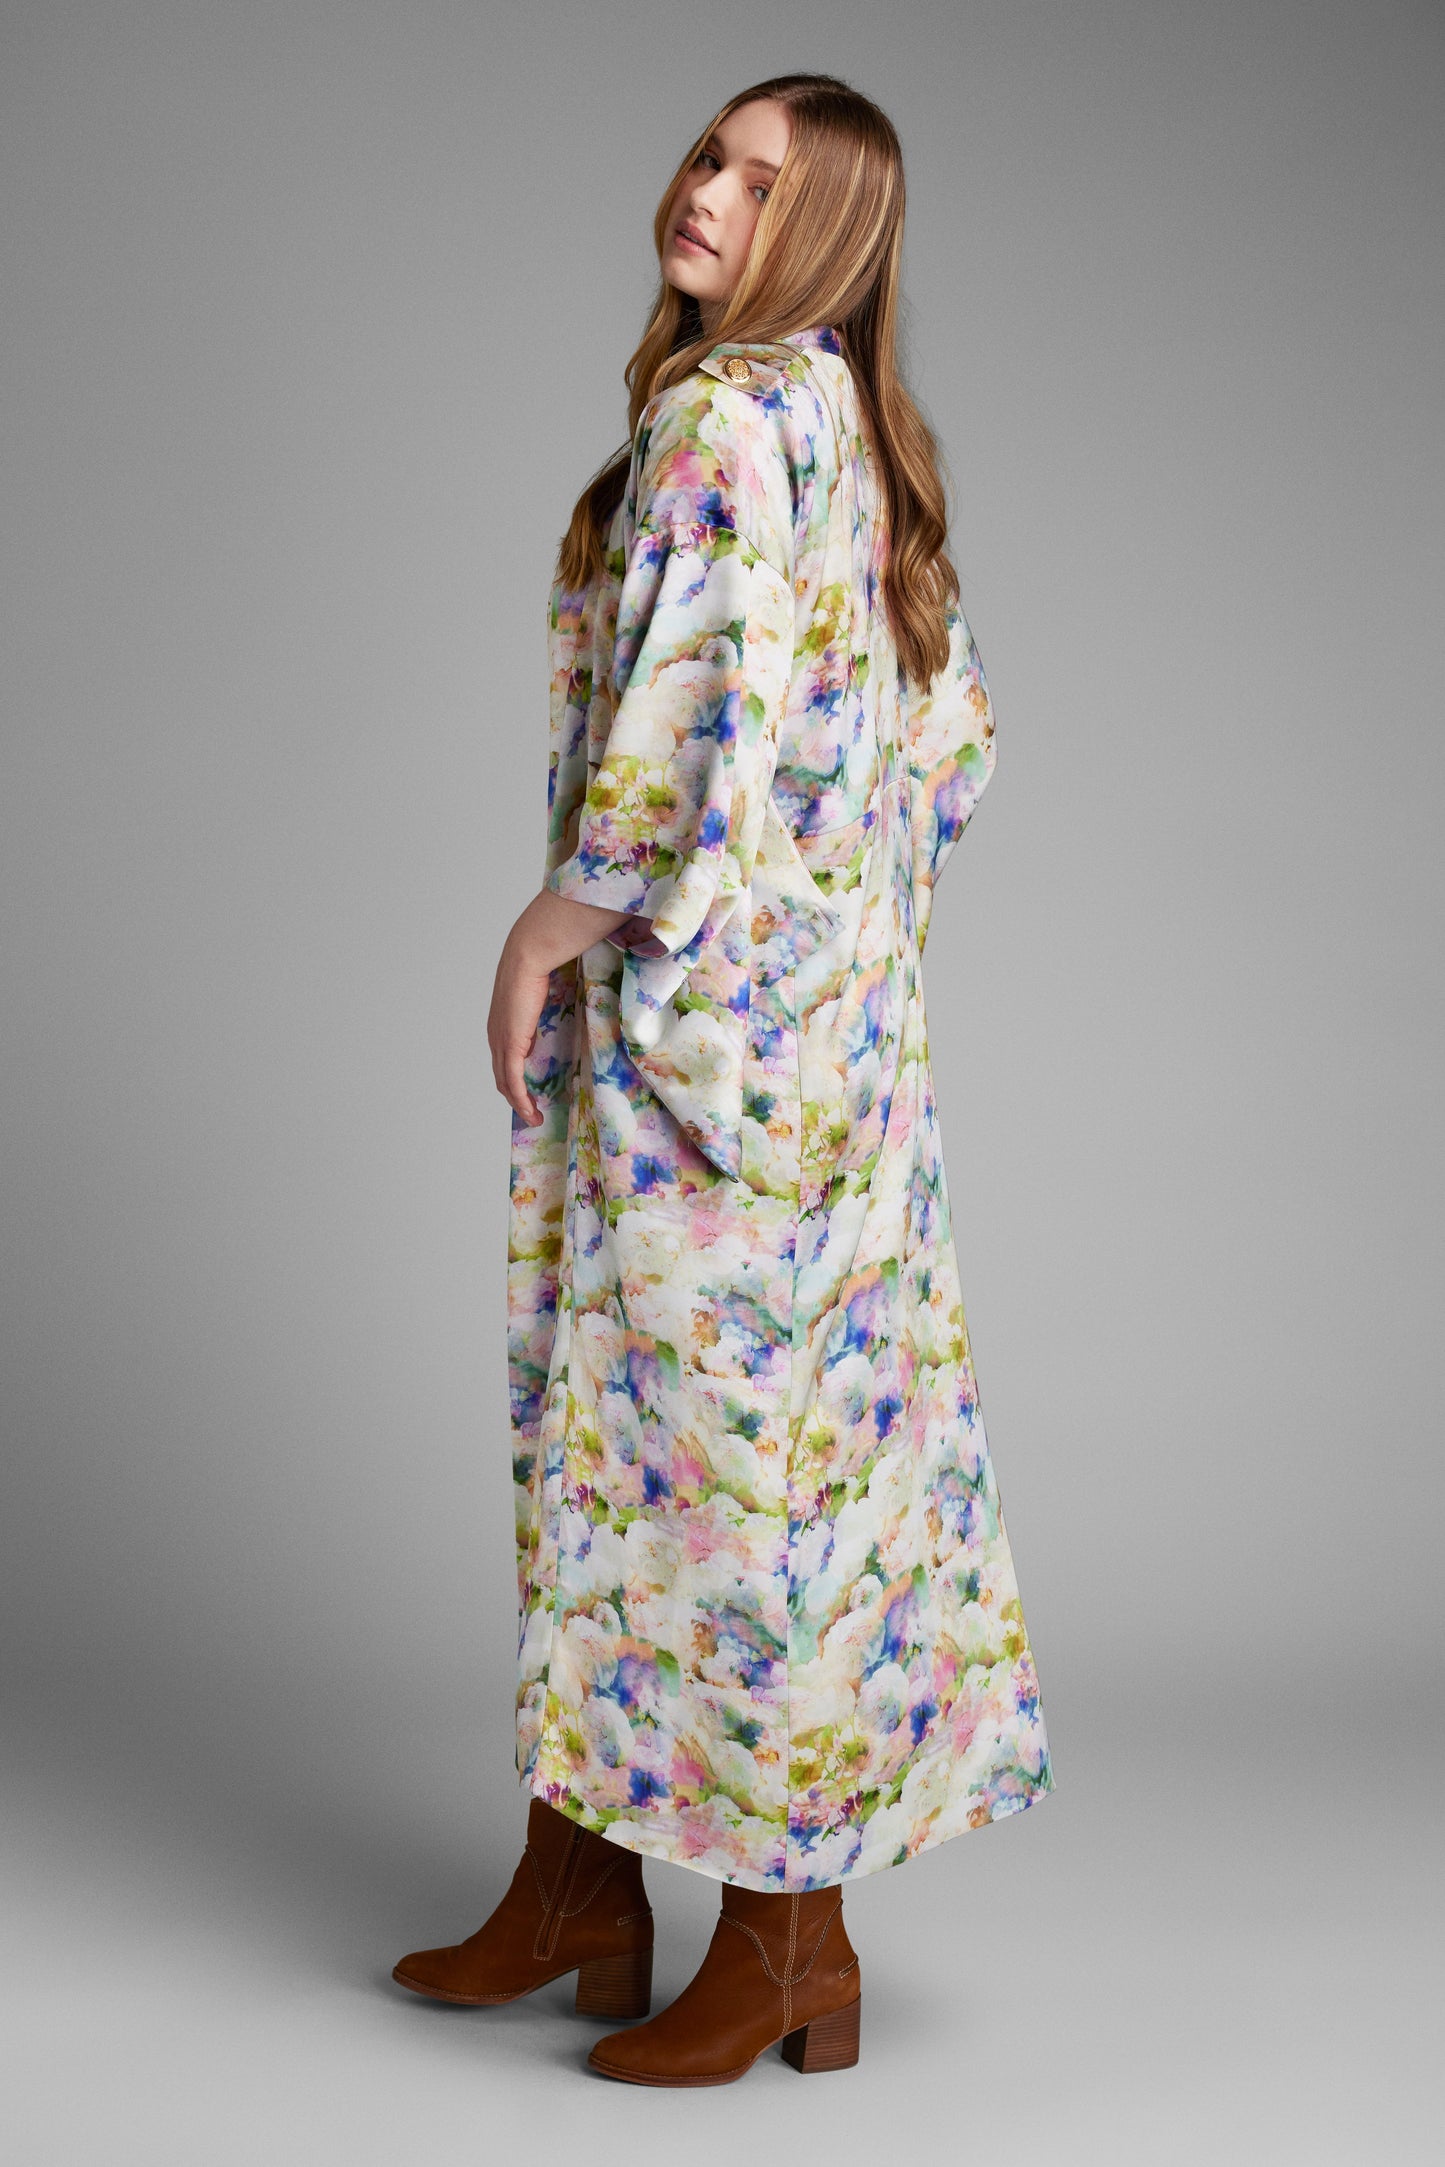 Back profile of woman modelling a long all over floral printed kimono duster made from recycled materials